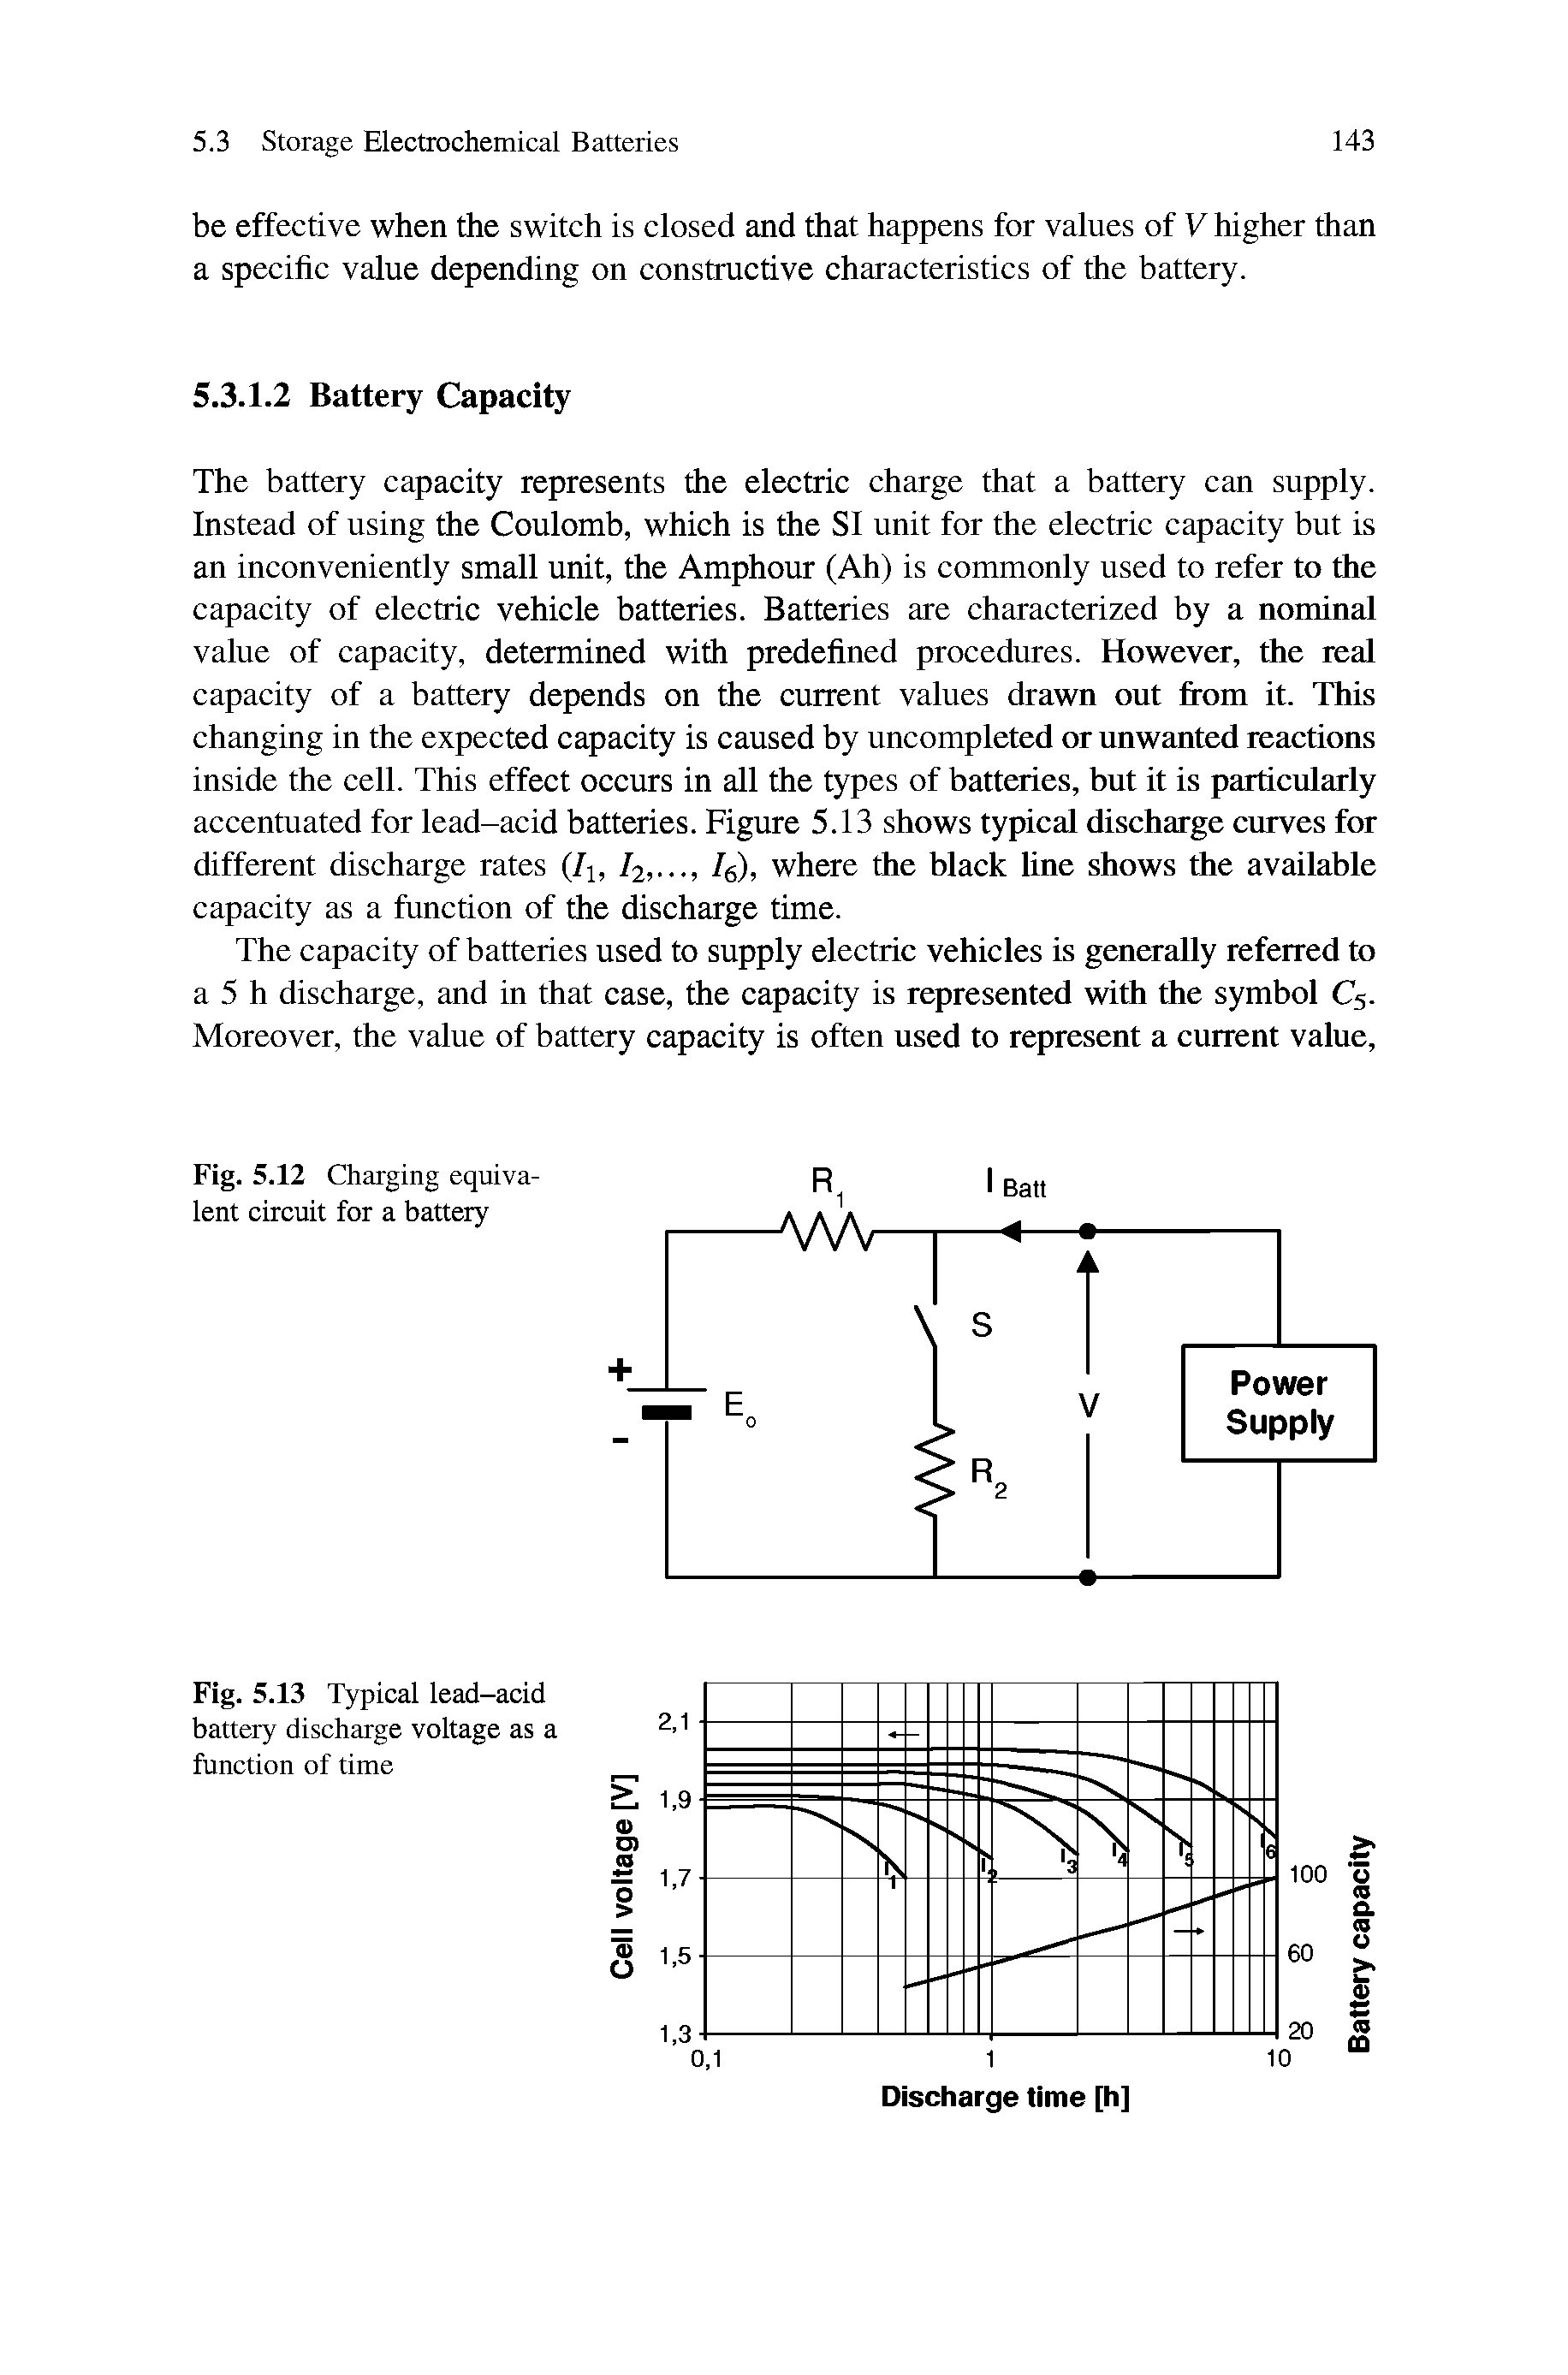 Fig. 5.13 Typical lead-acid battery discharge voltage as a function of time...